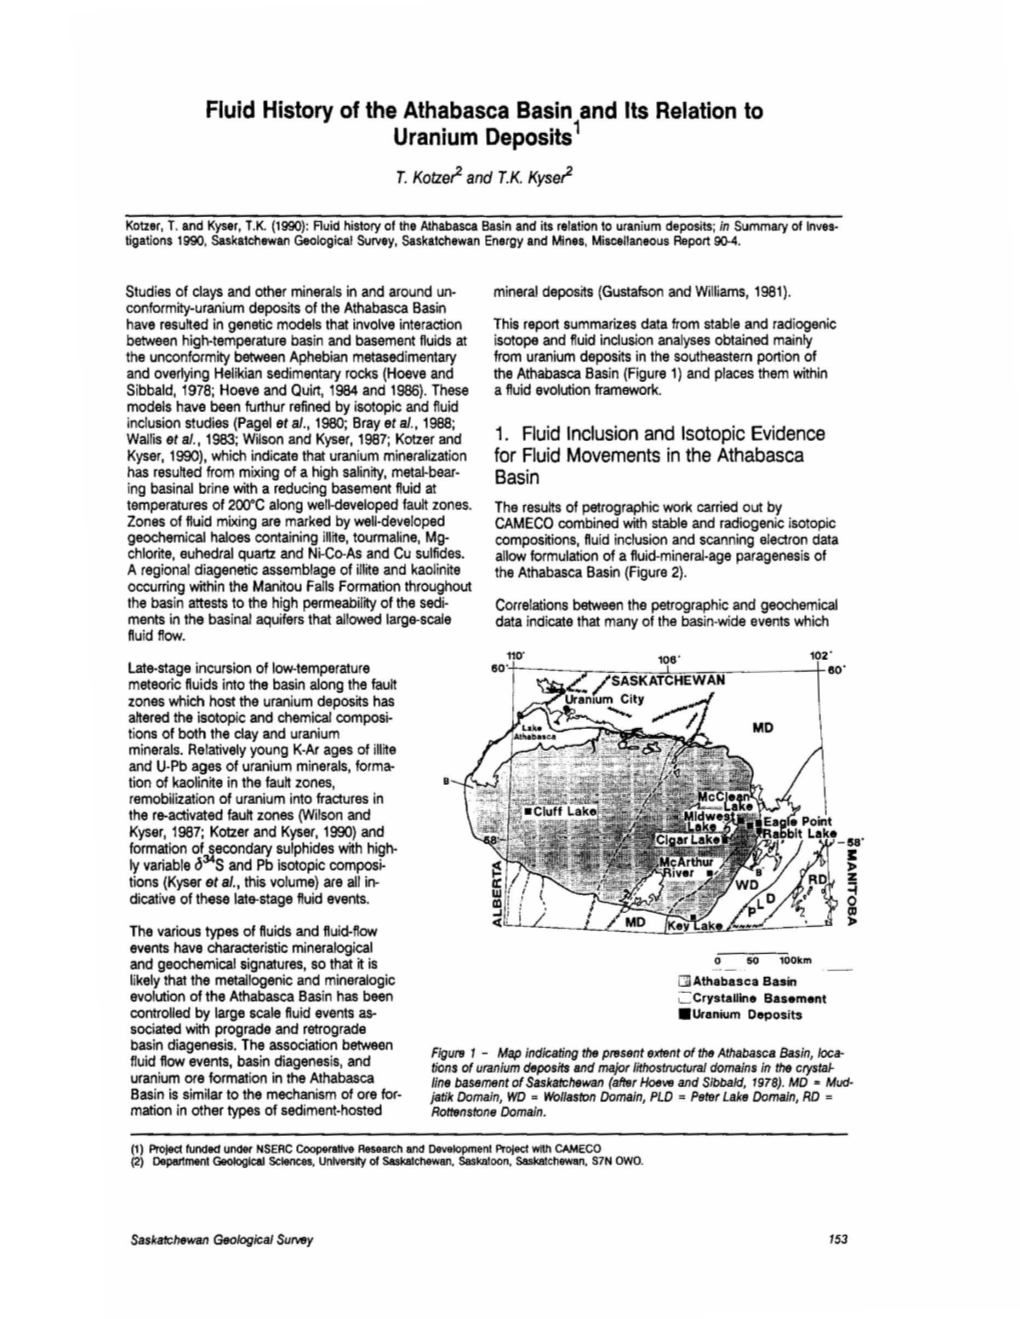 Fluid History of the Athabasca Basin and Its Relation to Uranium Deposits 1